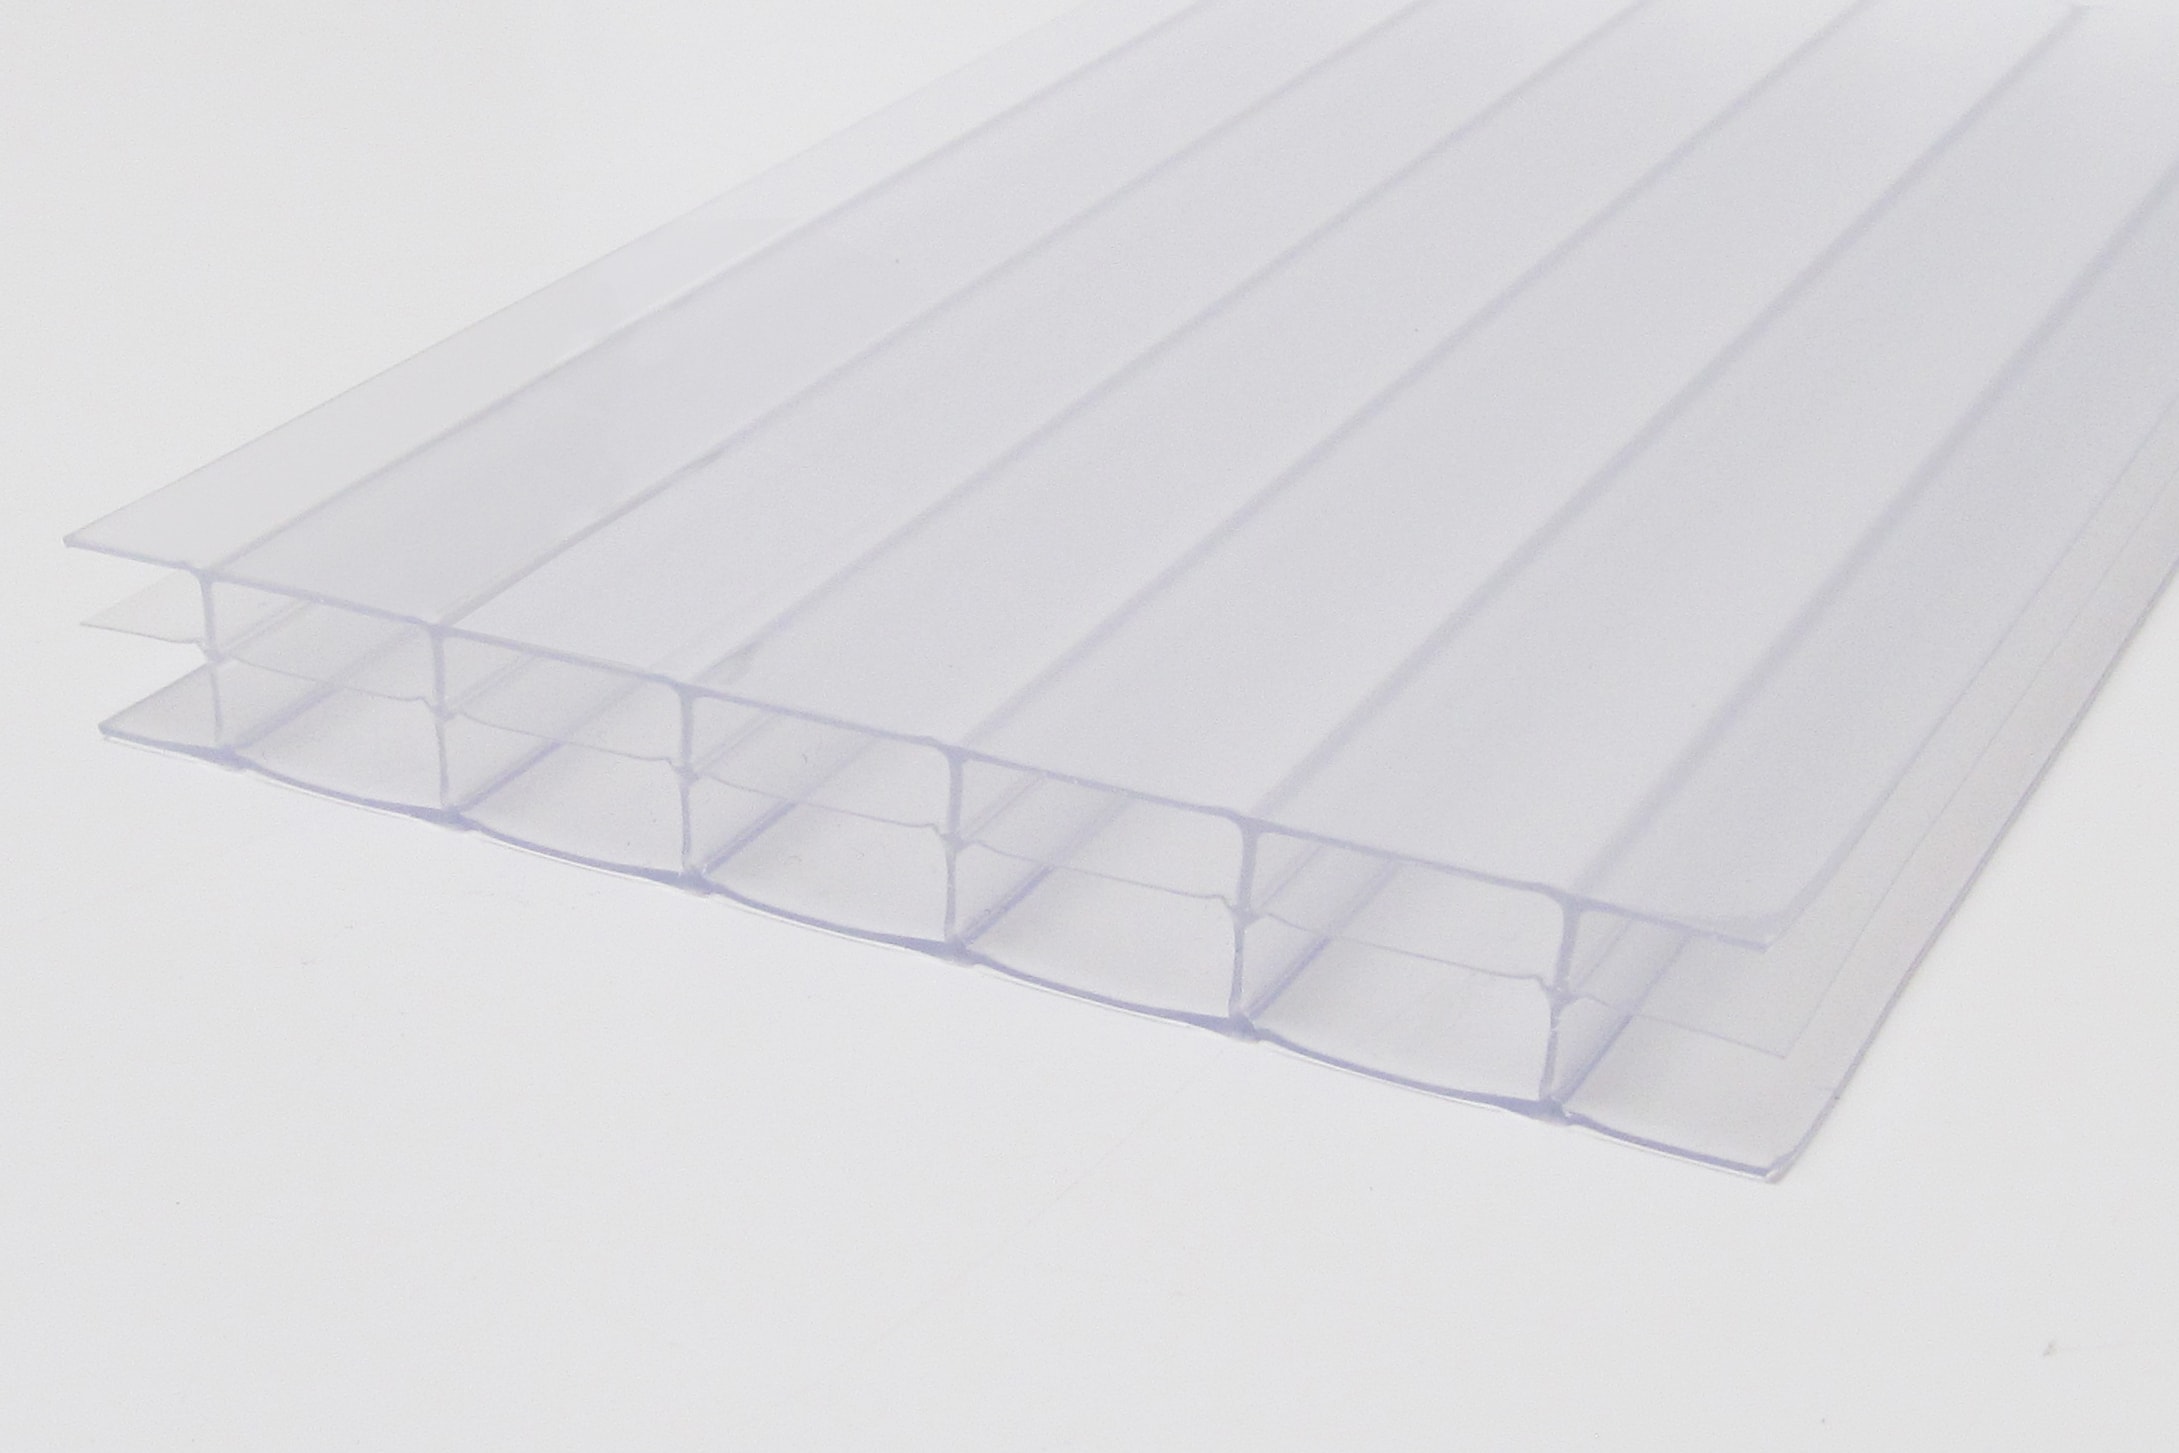 Lexan 48 in. x 96 in. x 0.314 in. Softlite Thermoclear Polycarbonate Sheet 15762128